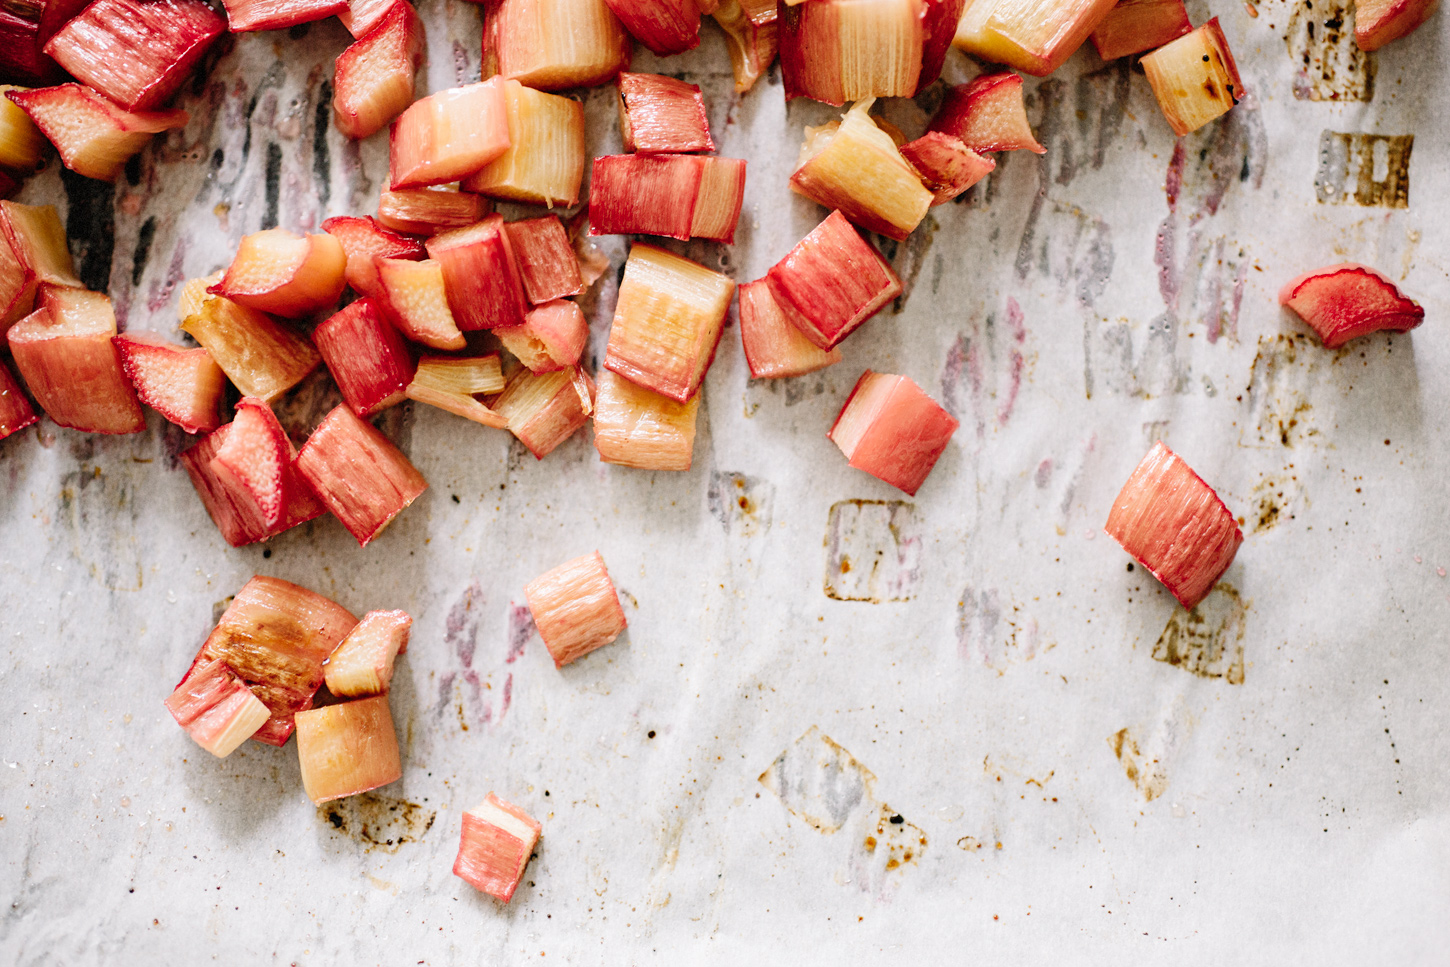 https://images.squarespace-cdn.com/content/v1/55470460e4b0b5d7d7c67dad/1525905096876-XCD8DJD4ULOZ3U991PH5/Pistachio+Rhubarb+Loaf+.+Sprouted+Kitchen